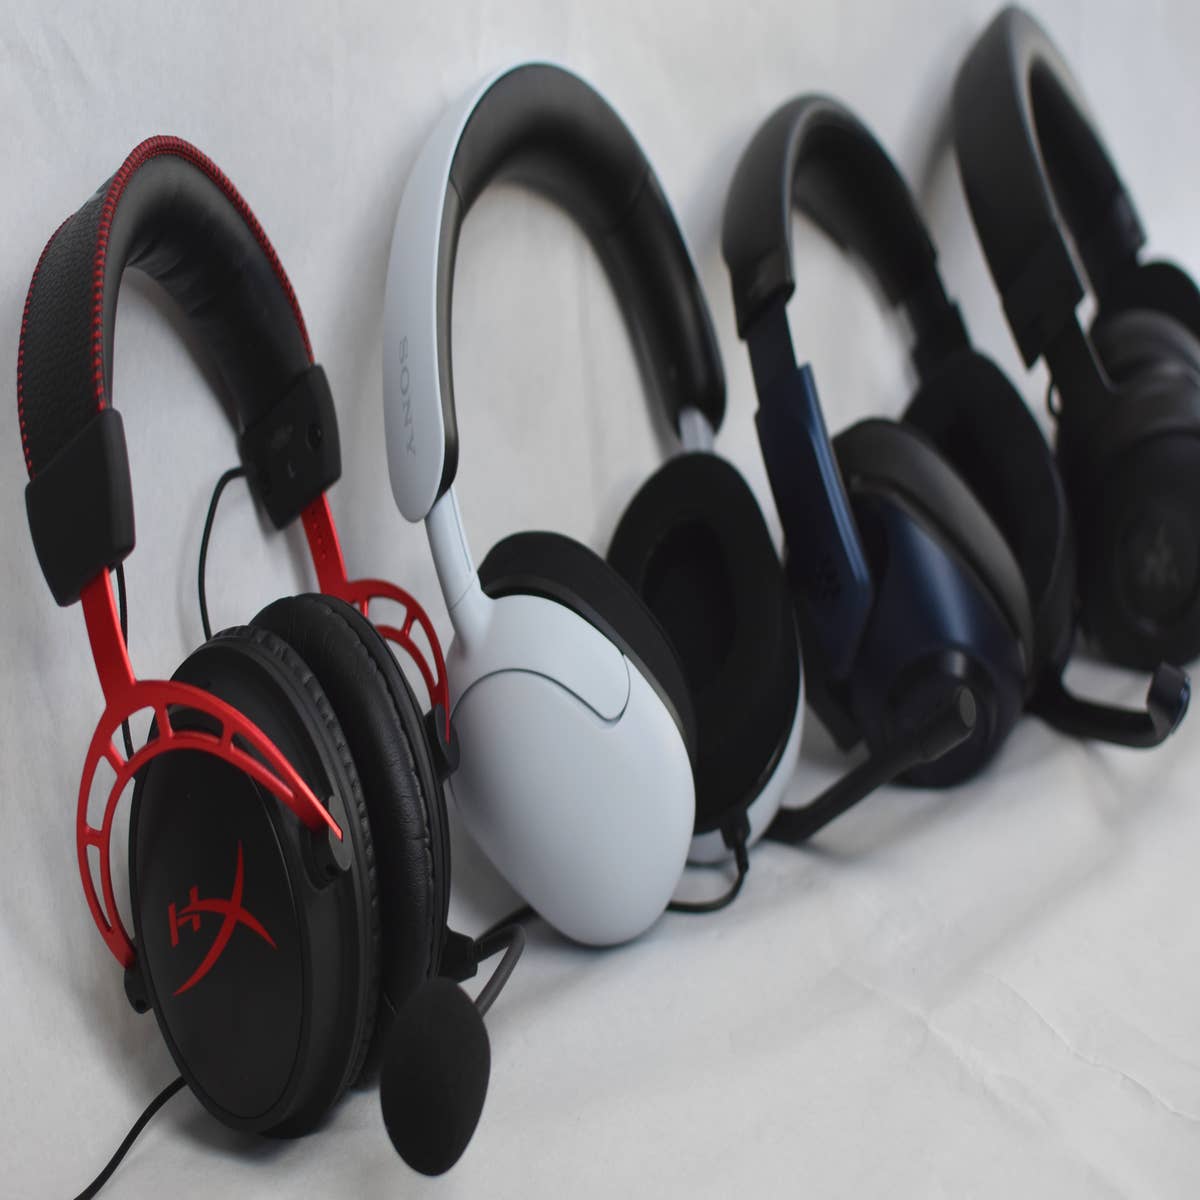 https://assetsio.gnwcdn.com/Best-PC-gaming-headsets.JPG?width=1200&height=1200&fit=bounds&quality=70&format=jpg&auto=webp